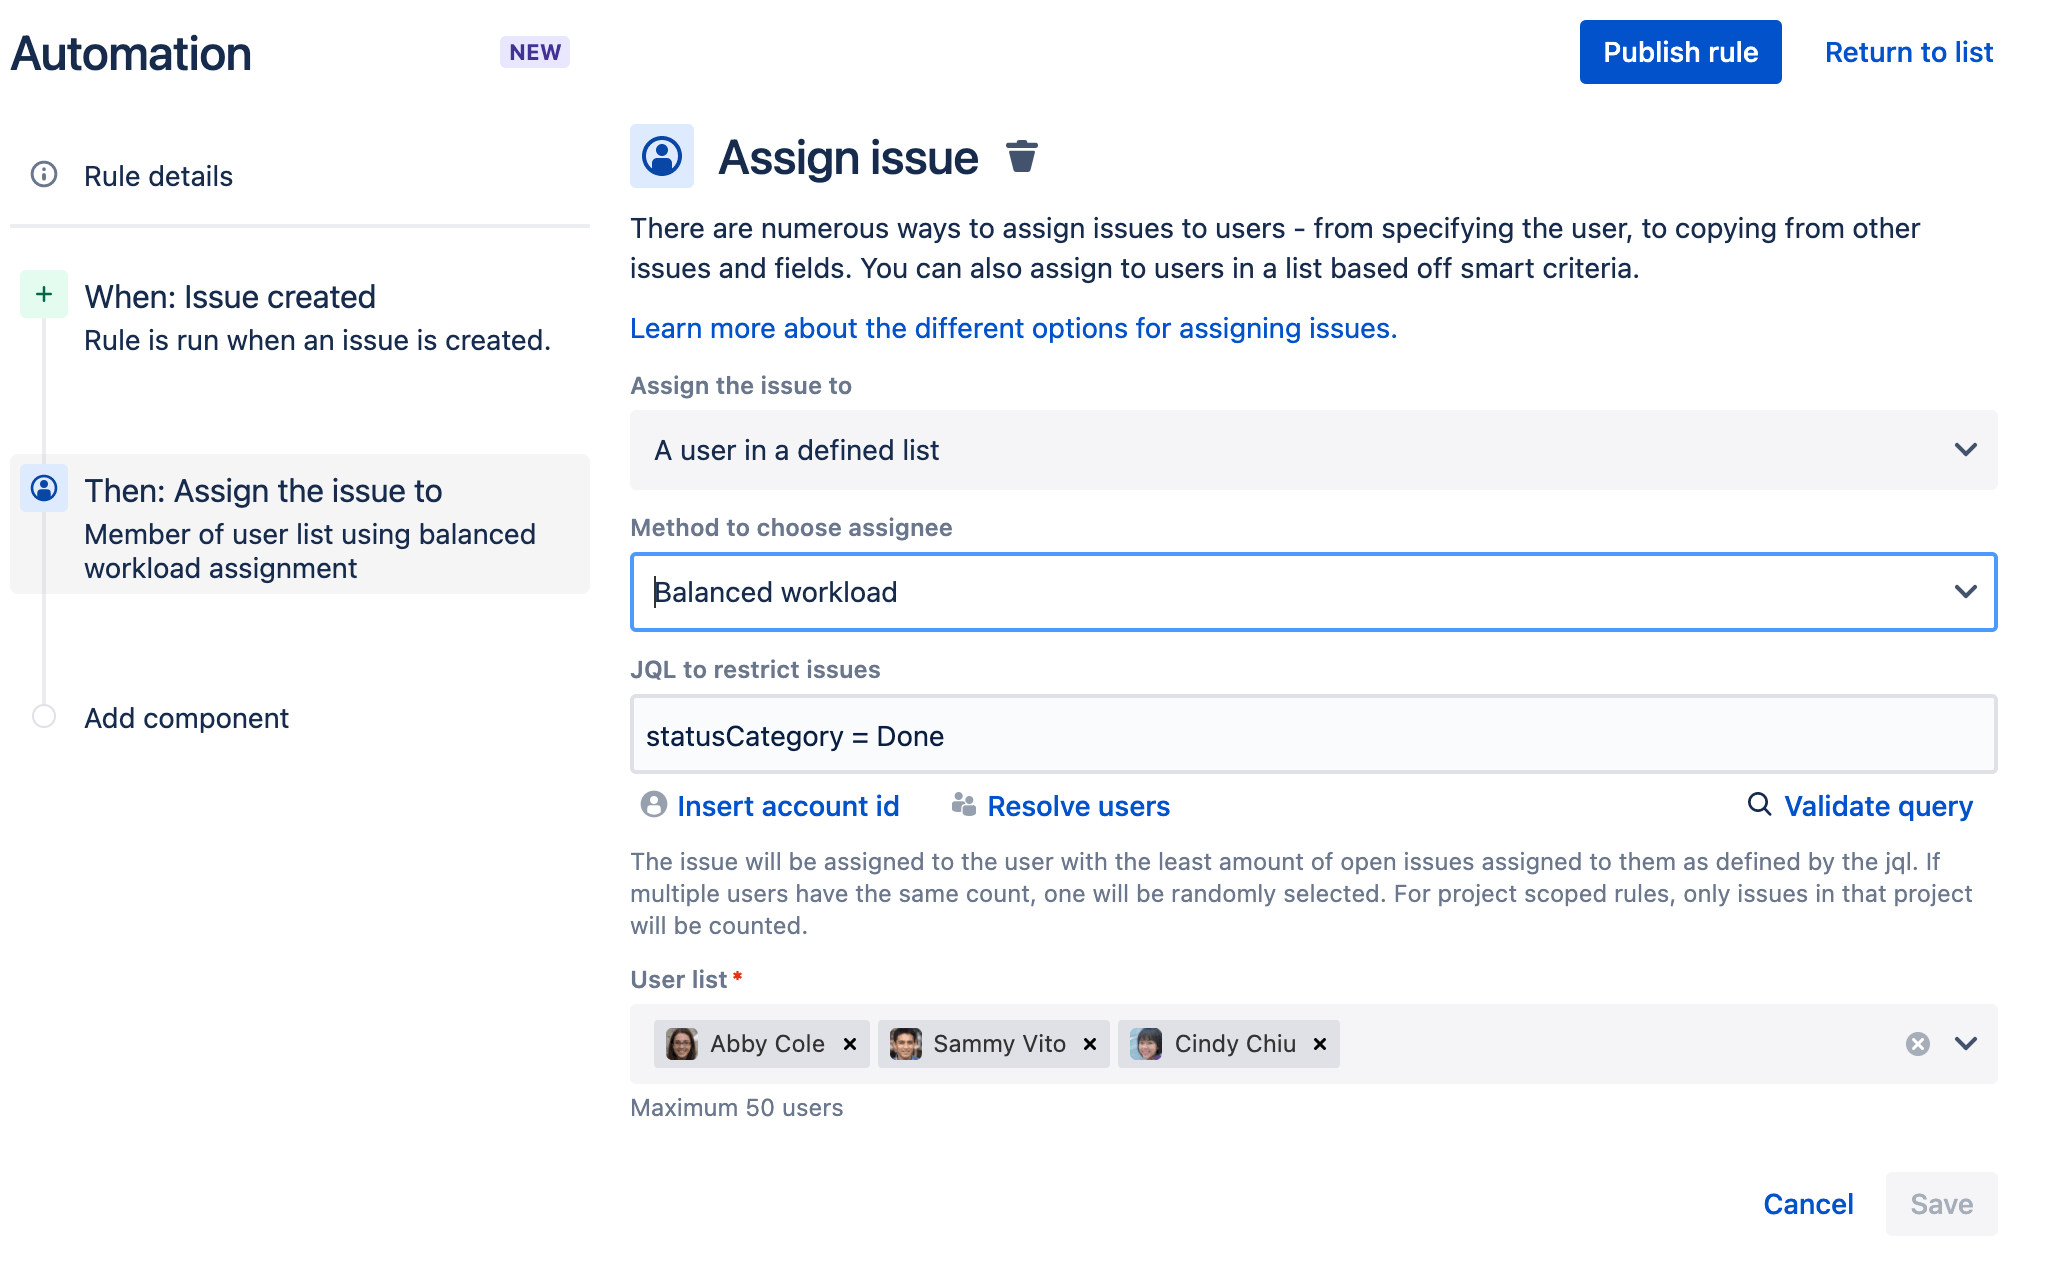 Building rules for automation in Jira Service Management